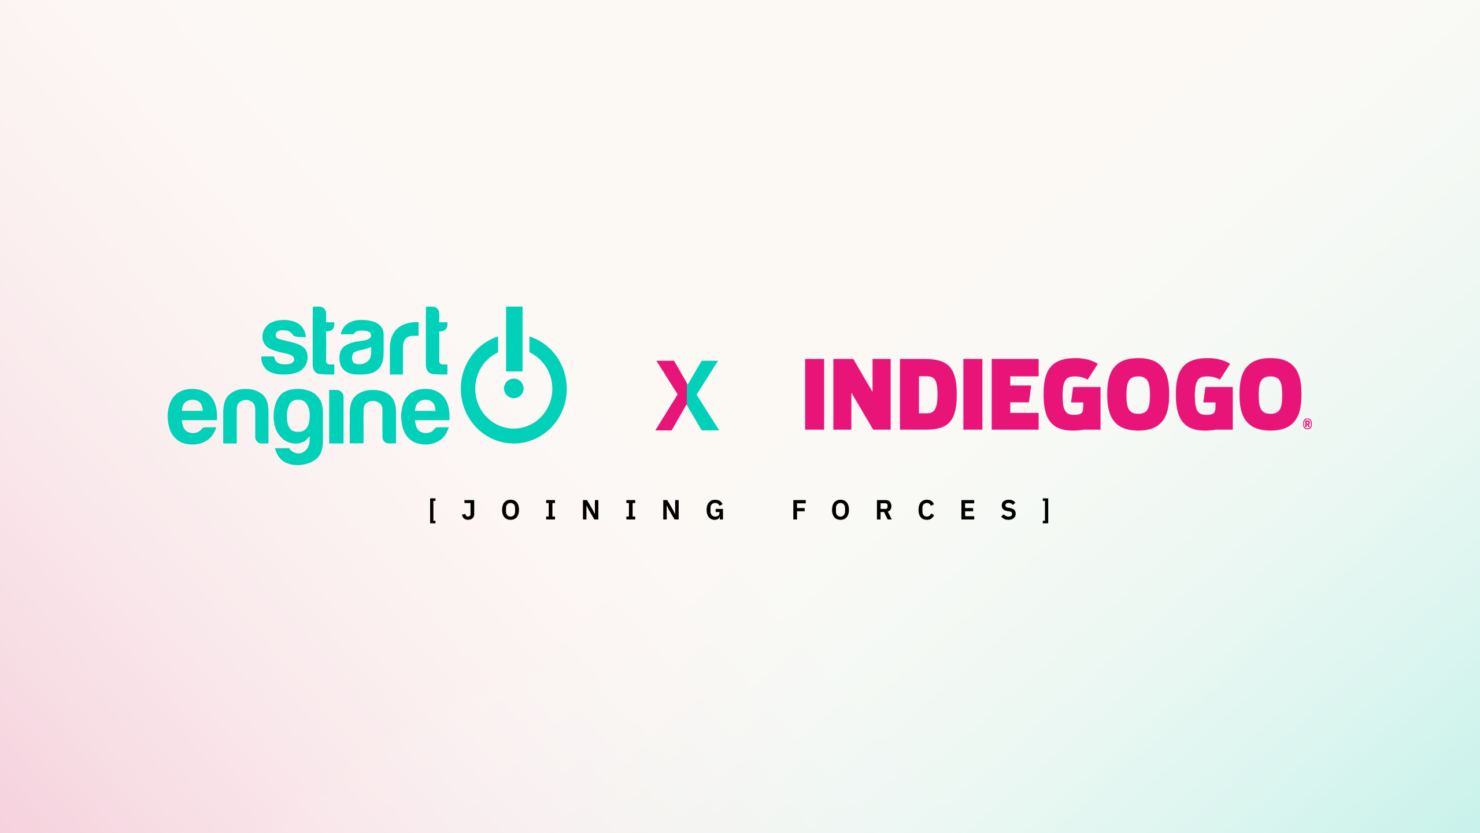 Indiegogo and StartEngine Team Up to Help Startups Raise Capital from Ideation to Series C